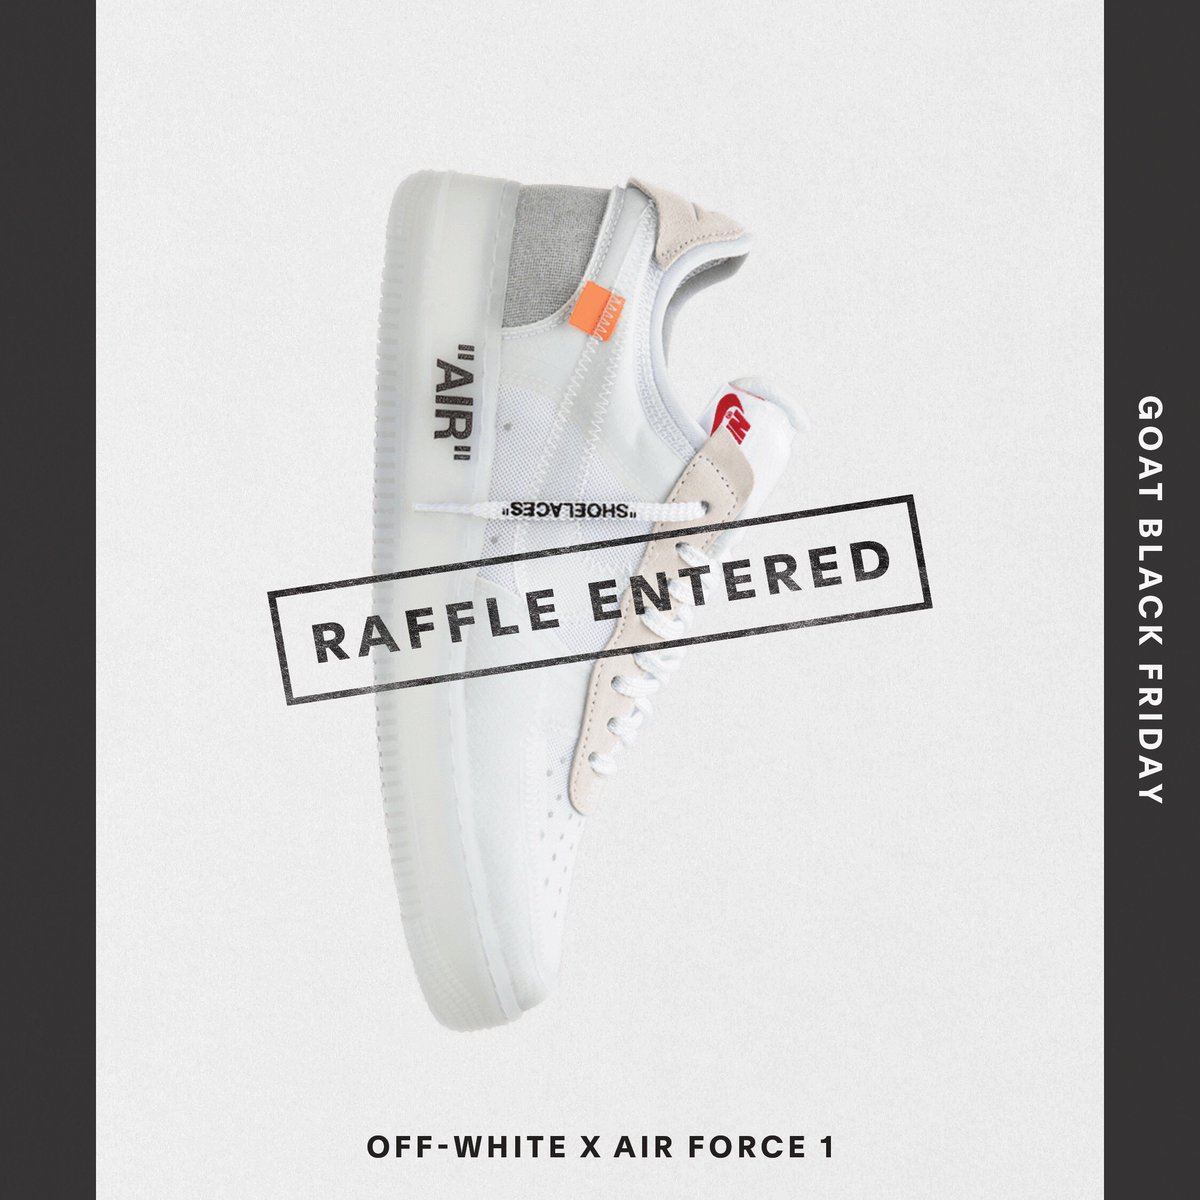 Enter the #GOATBlackFriday Raffle for your chance to win the most coveted sneakers and other prizes. @goatapp goat.app.link/MIrHzfsf4R